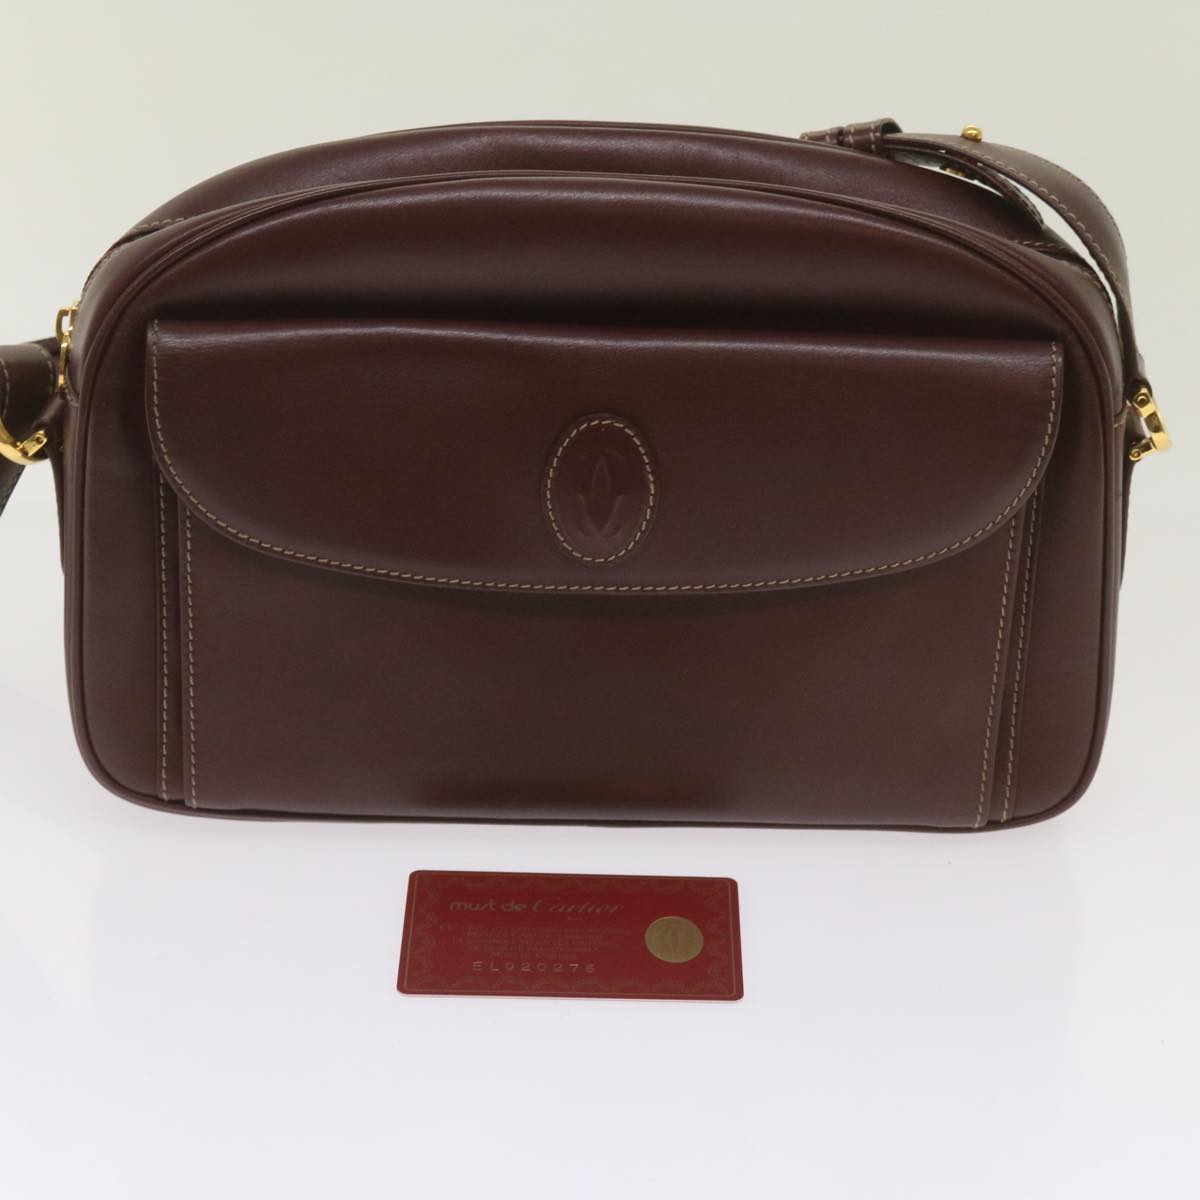 CARTIER Shoulder Bag Leather Wine Red Auth 68320